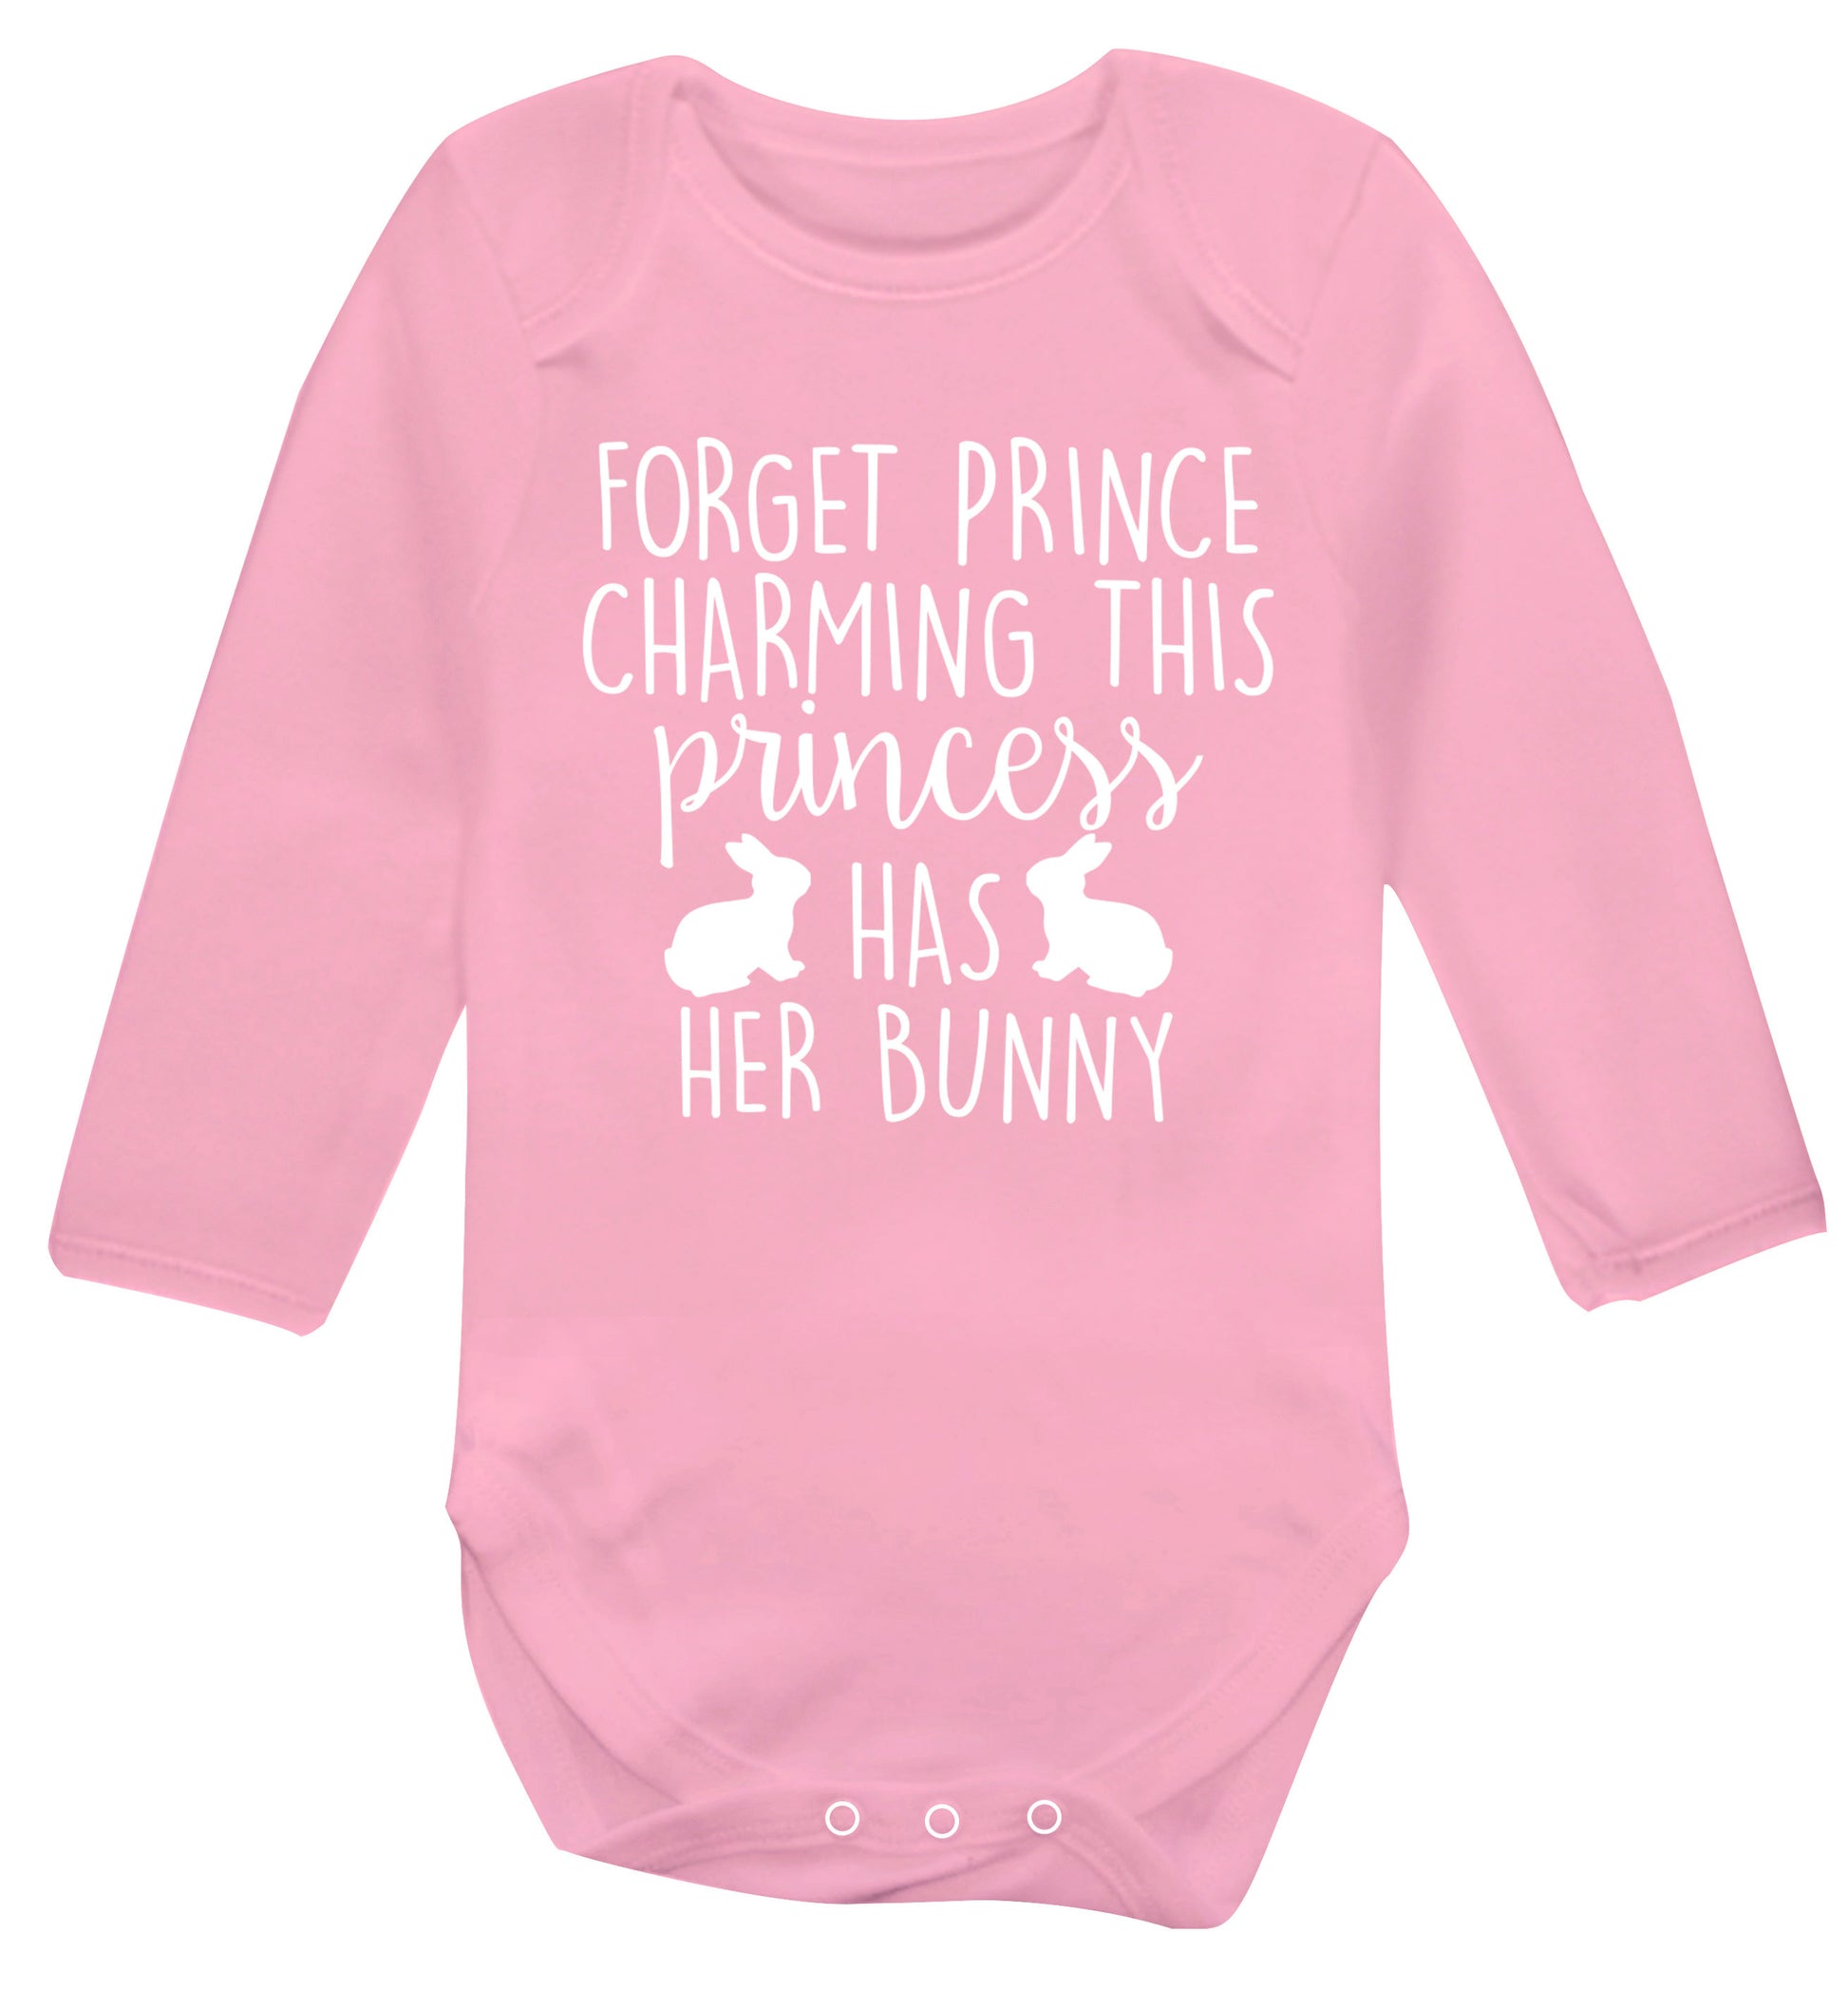 Forget prince charming this princess has her bunny Baby Vest long sleeved pale pink 6-12 months